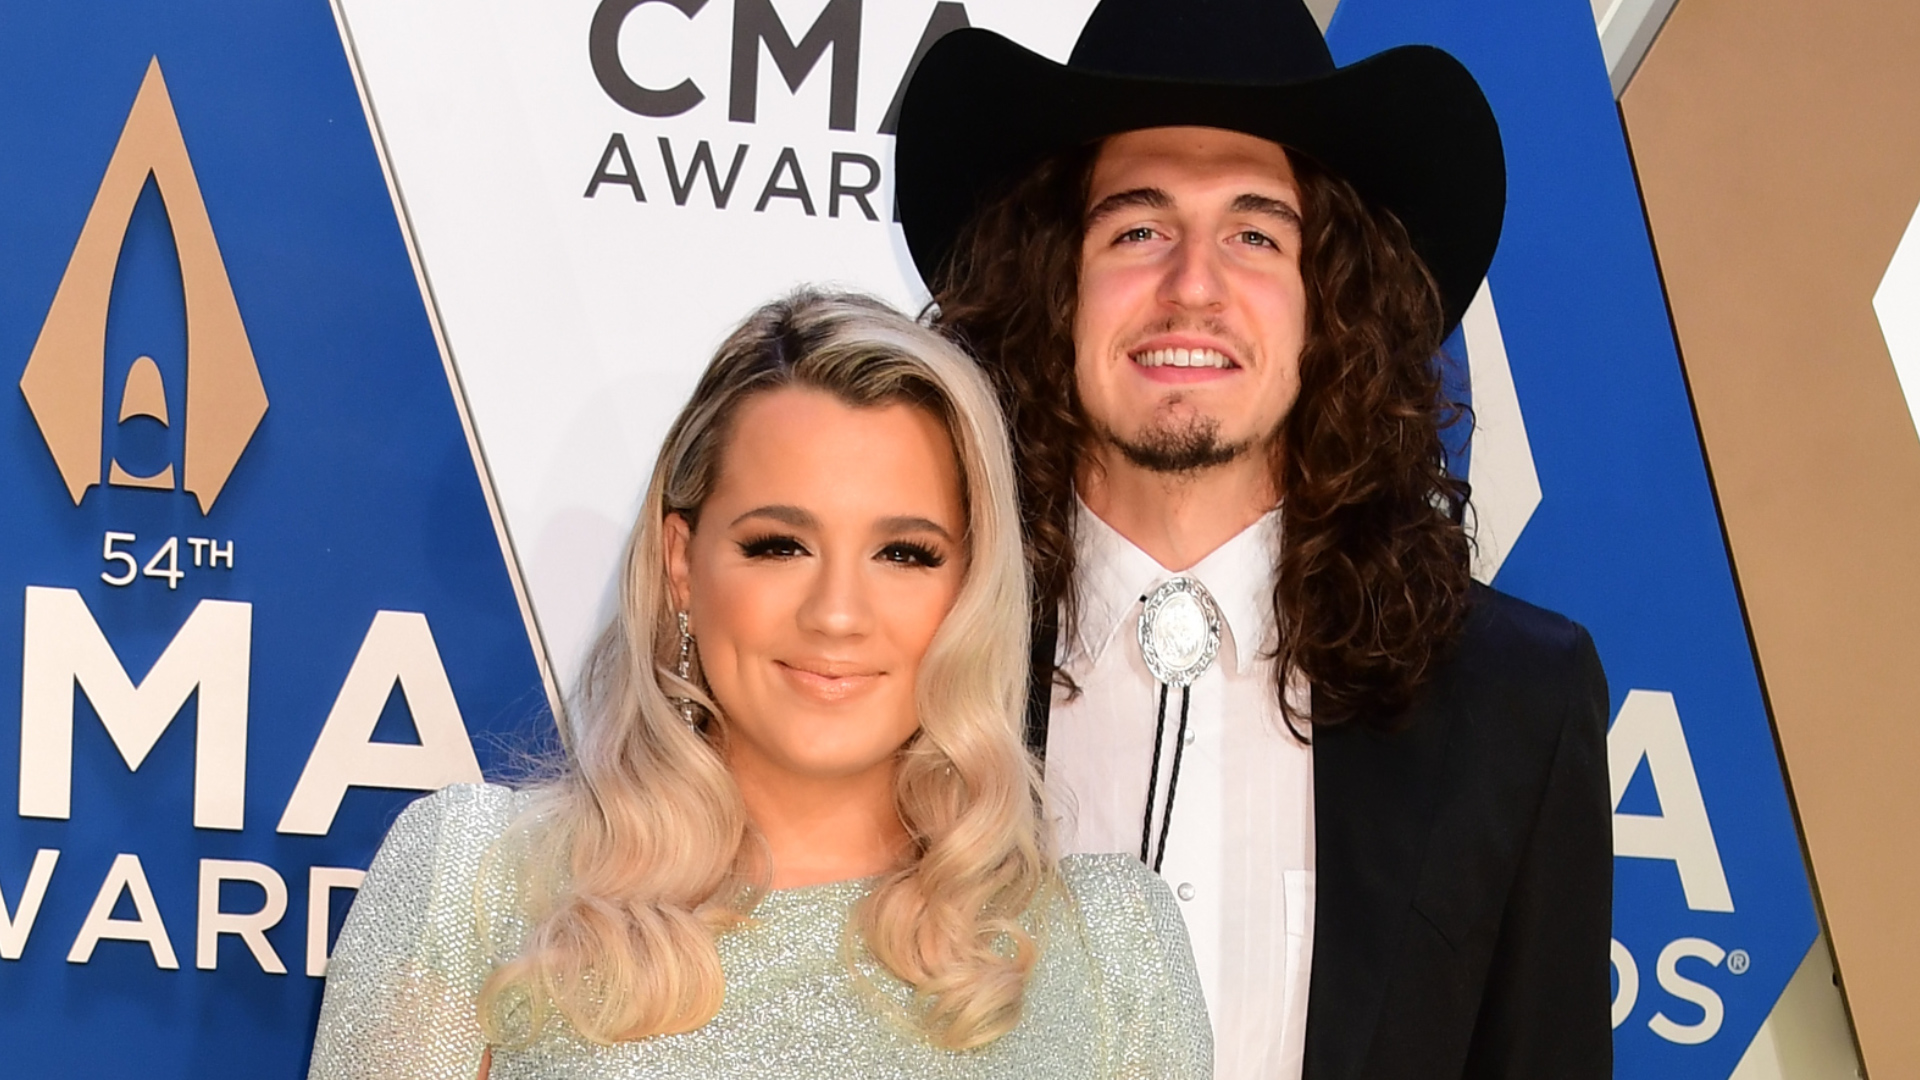 American Idol' Alums Gabby Barrett & Cade Foehner Welcome First Child Together: 'Meet Our Girl'